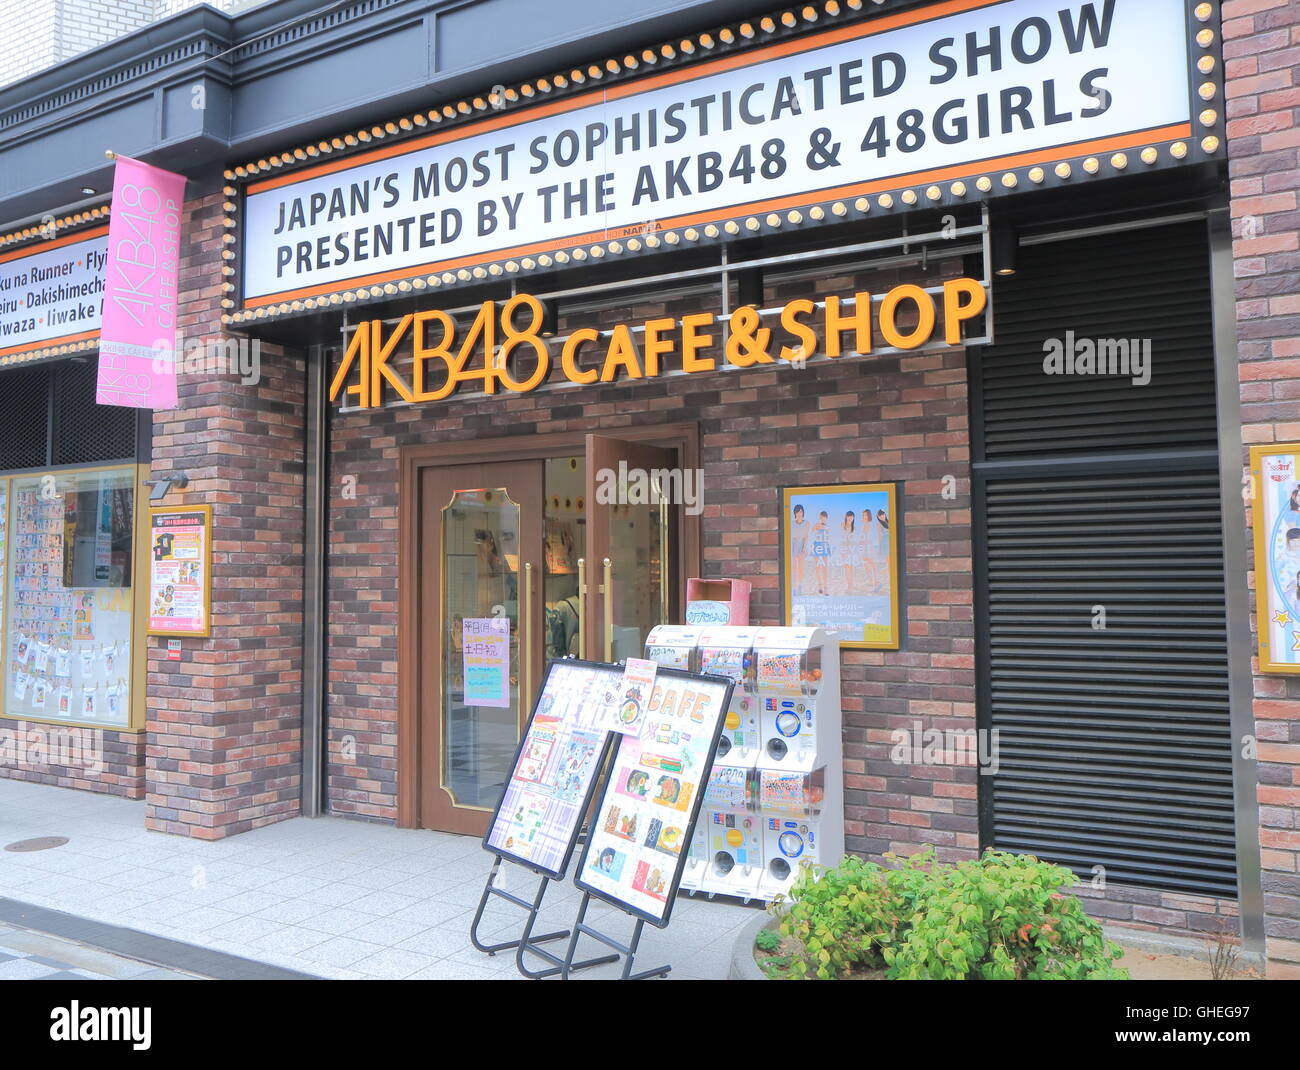 AKB48 Cafe and shop in Osaka Japan. AKB48 is a Japanese idol group initially named after the Akihabara area Tokyo. Stock Photo